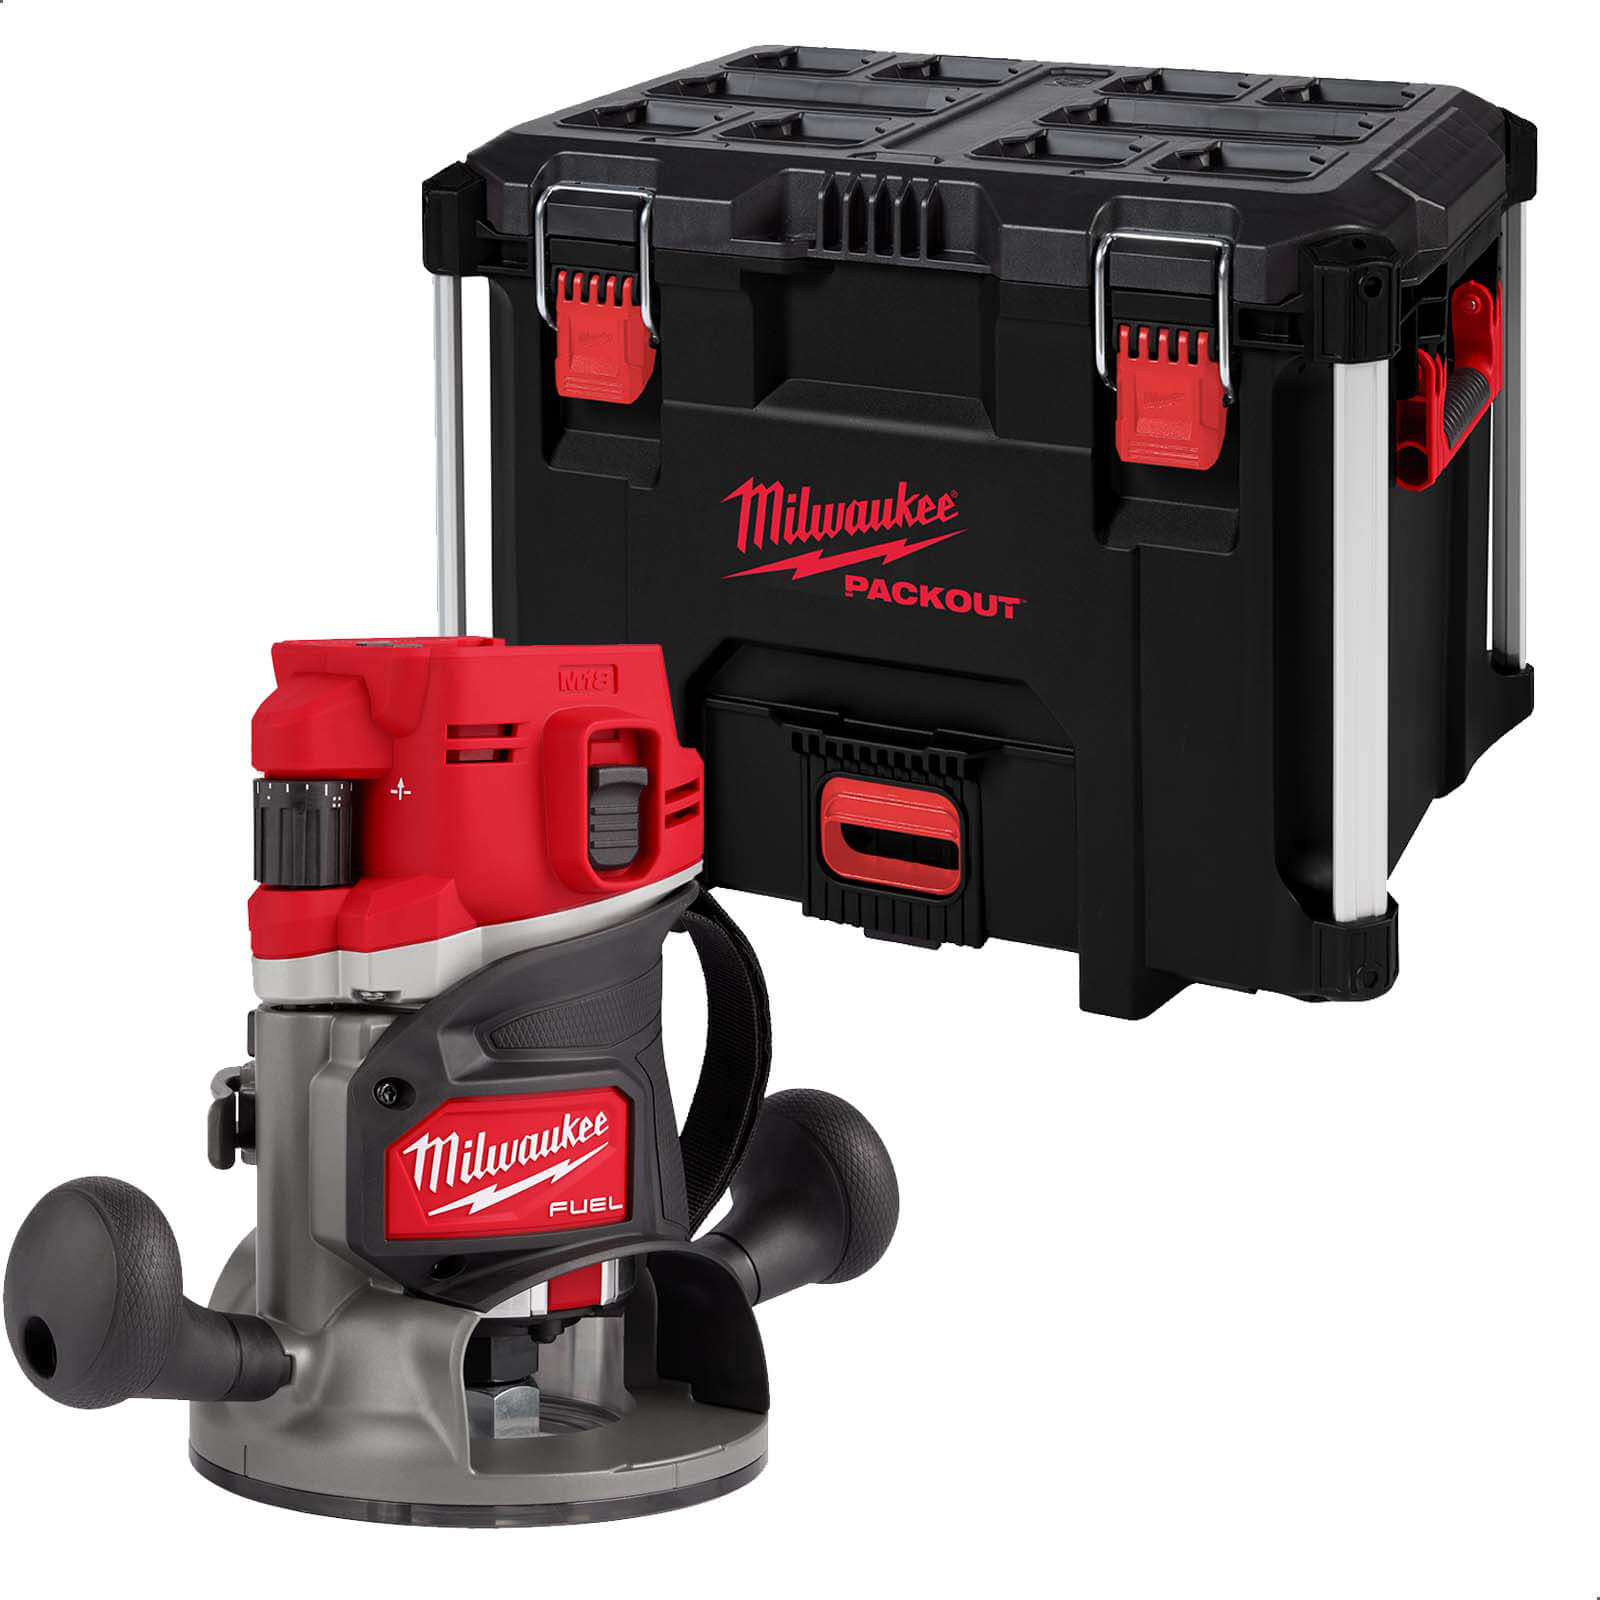 Photos - Router / Trimmer Milwaukee M18 FR12 Fuel 18v Cordless Brushless 1/2" Trim Router No Batteri 